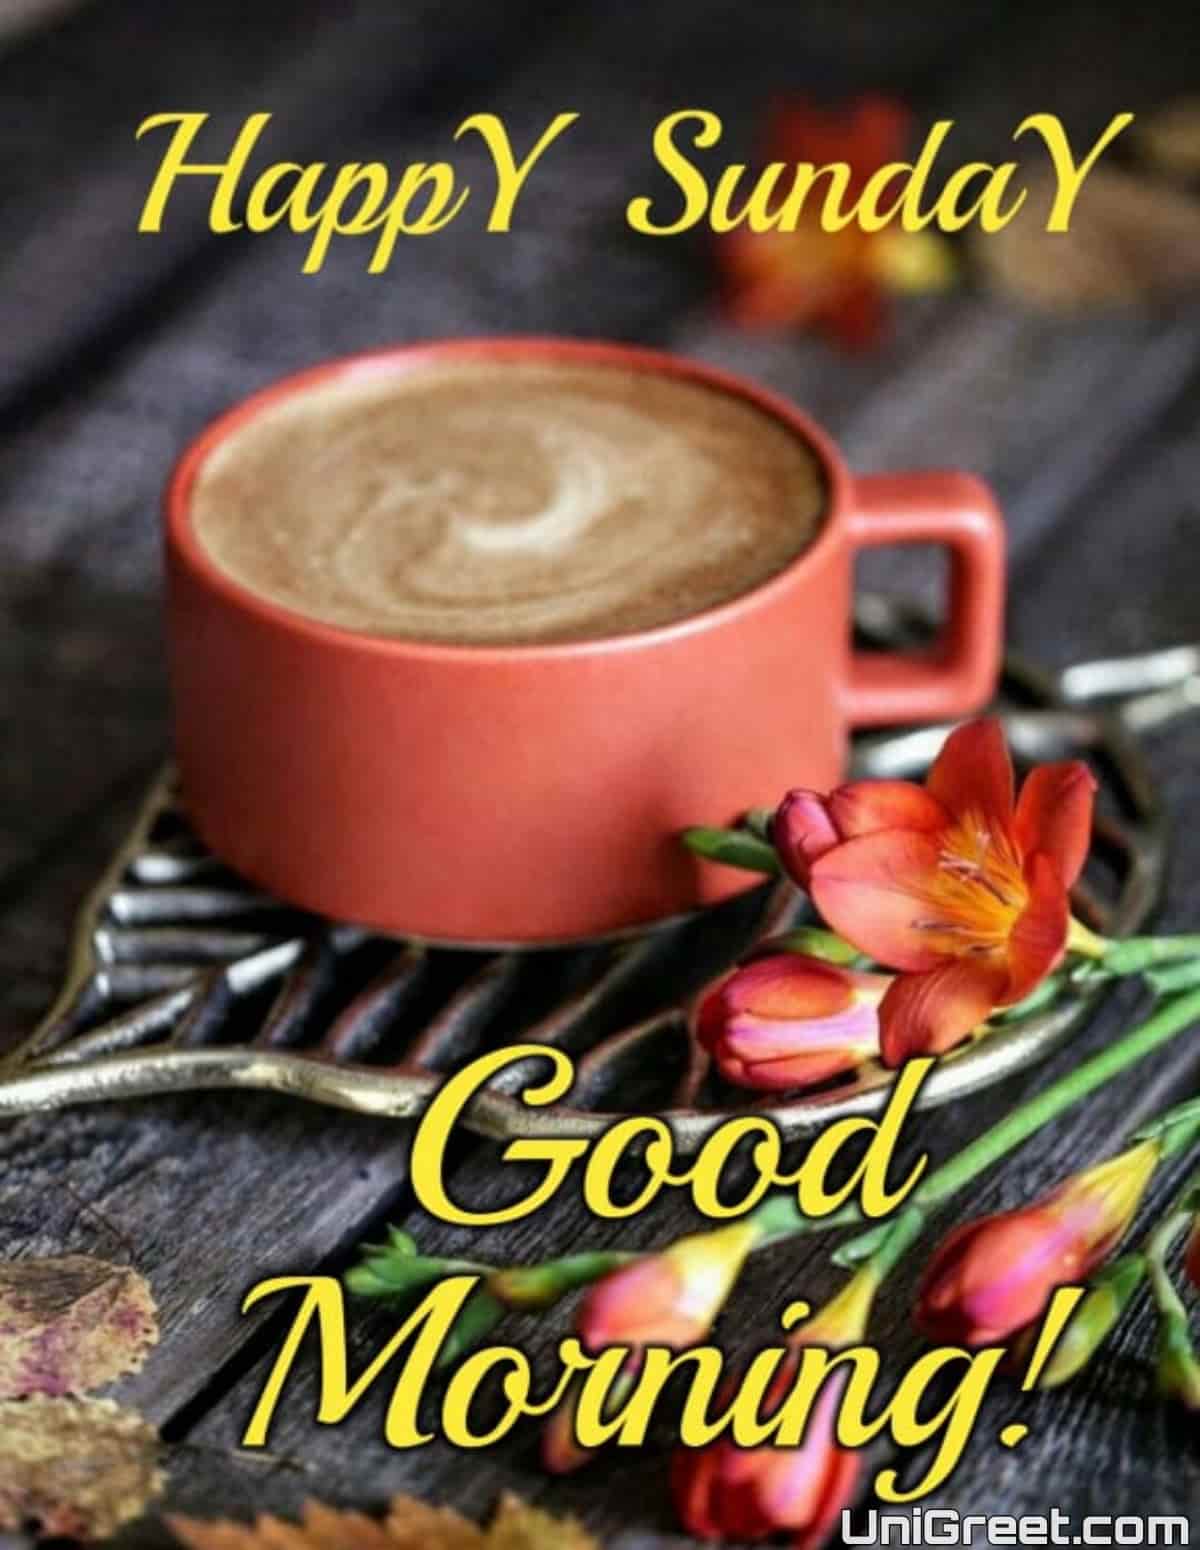 Top 999+ good morning happy sunday hd images – Amazing Collection good morning happy sunday hd images Full 4K